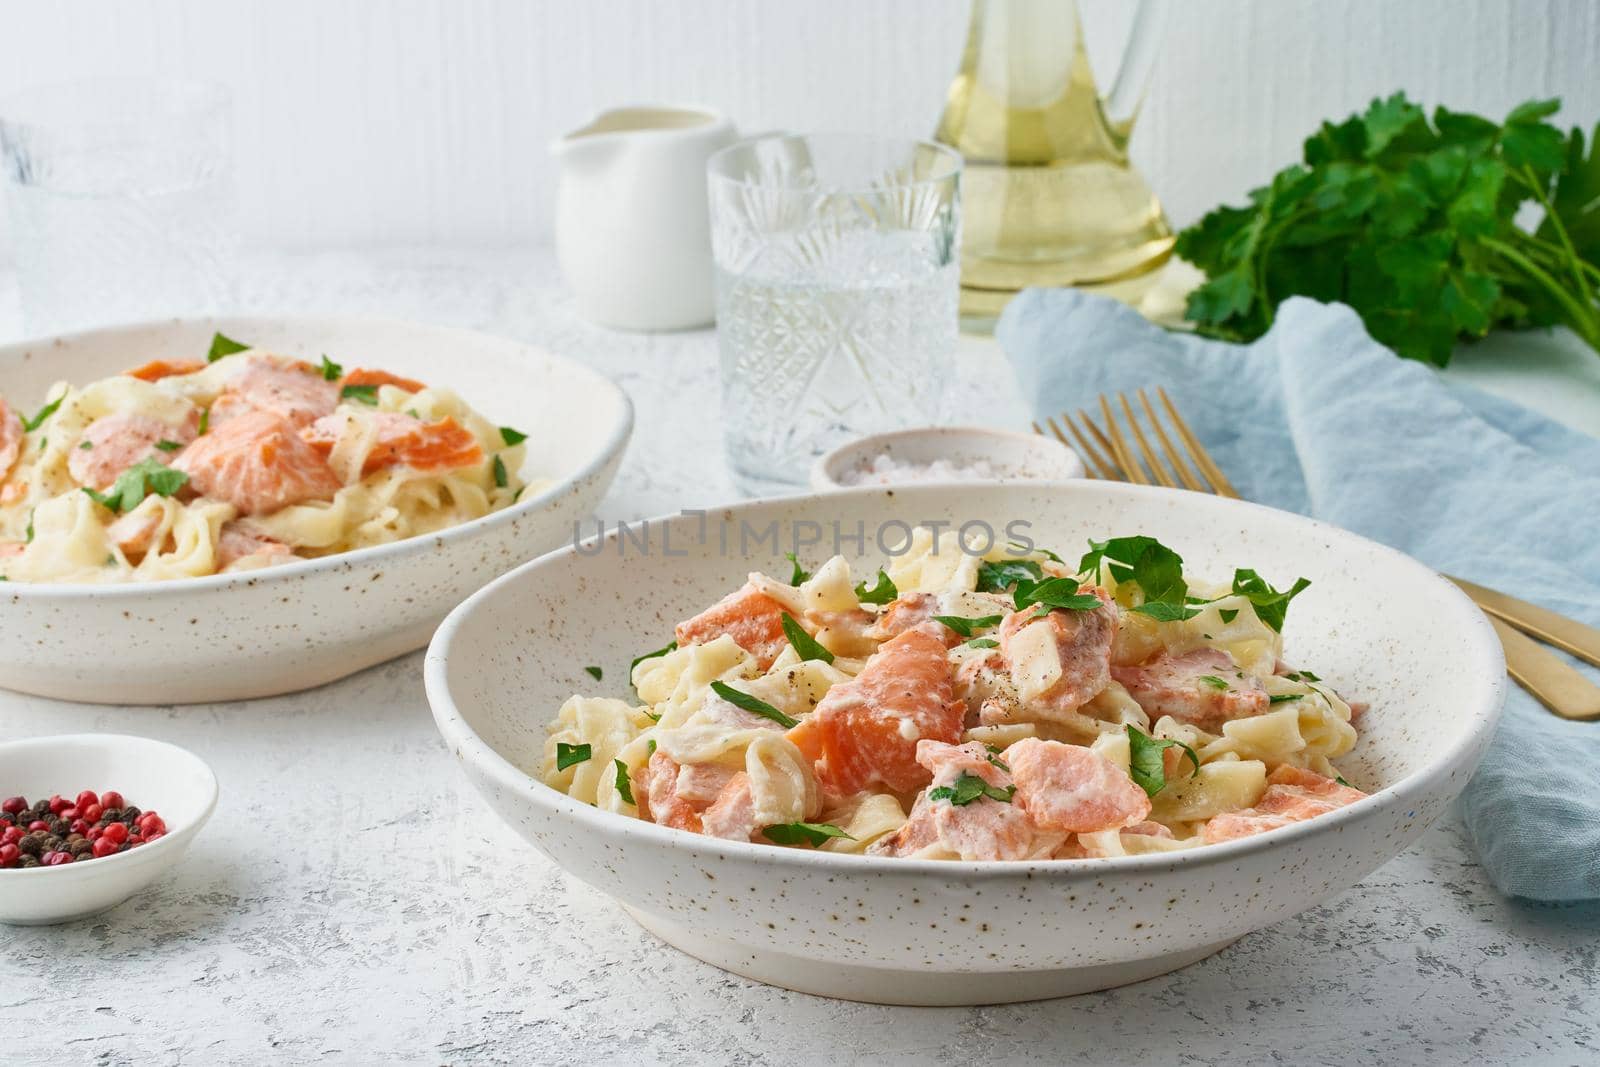 Salmon pasta, tagliatelle with fish and creamy sauce. Italian dinner with seafood for two at table. White background, side view